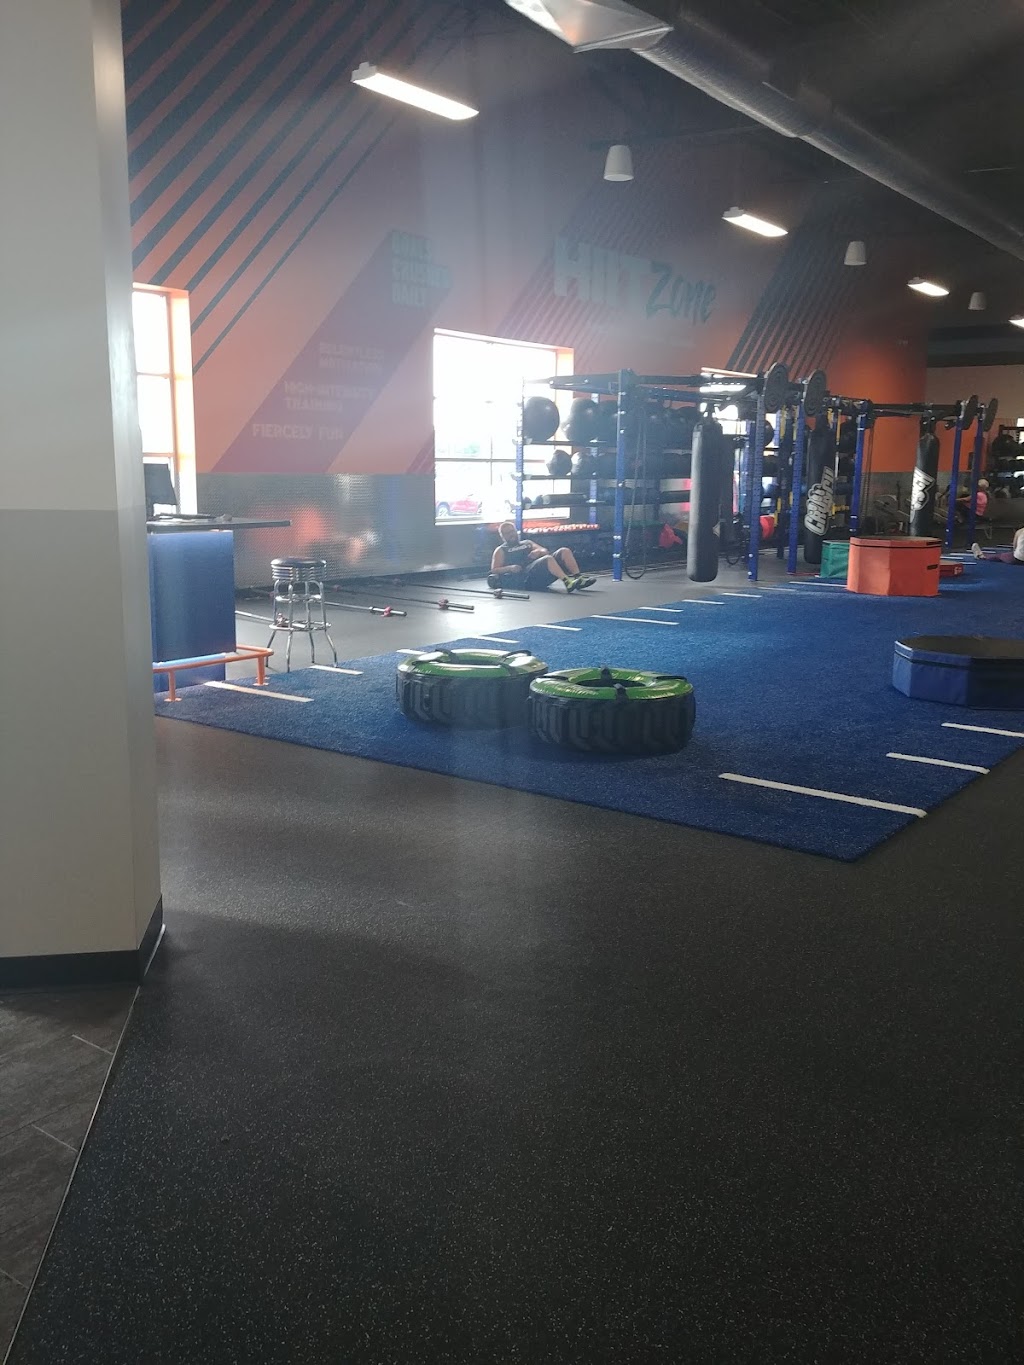 Crunch Fitness - Middletown | 109 Dunning Rd, Middletown, NY 10940 | Phone: (845) 243-6969